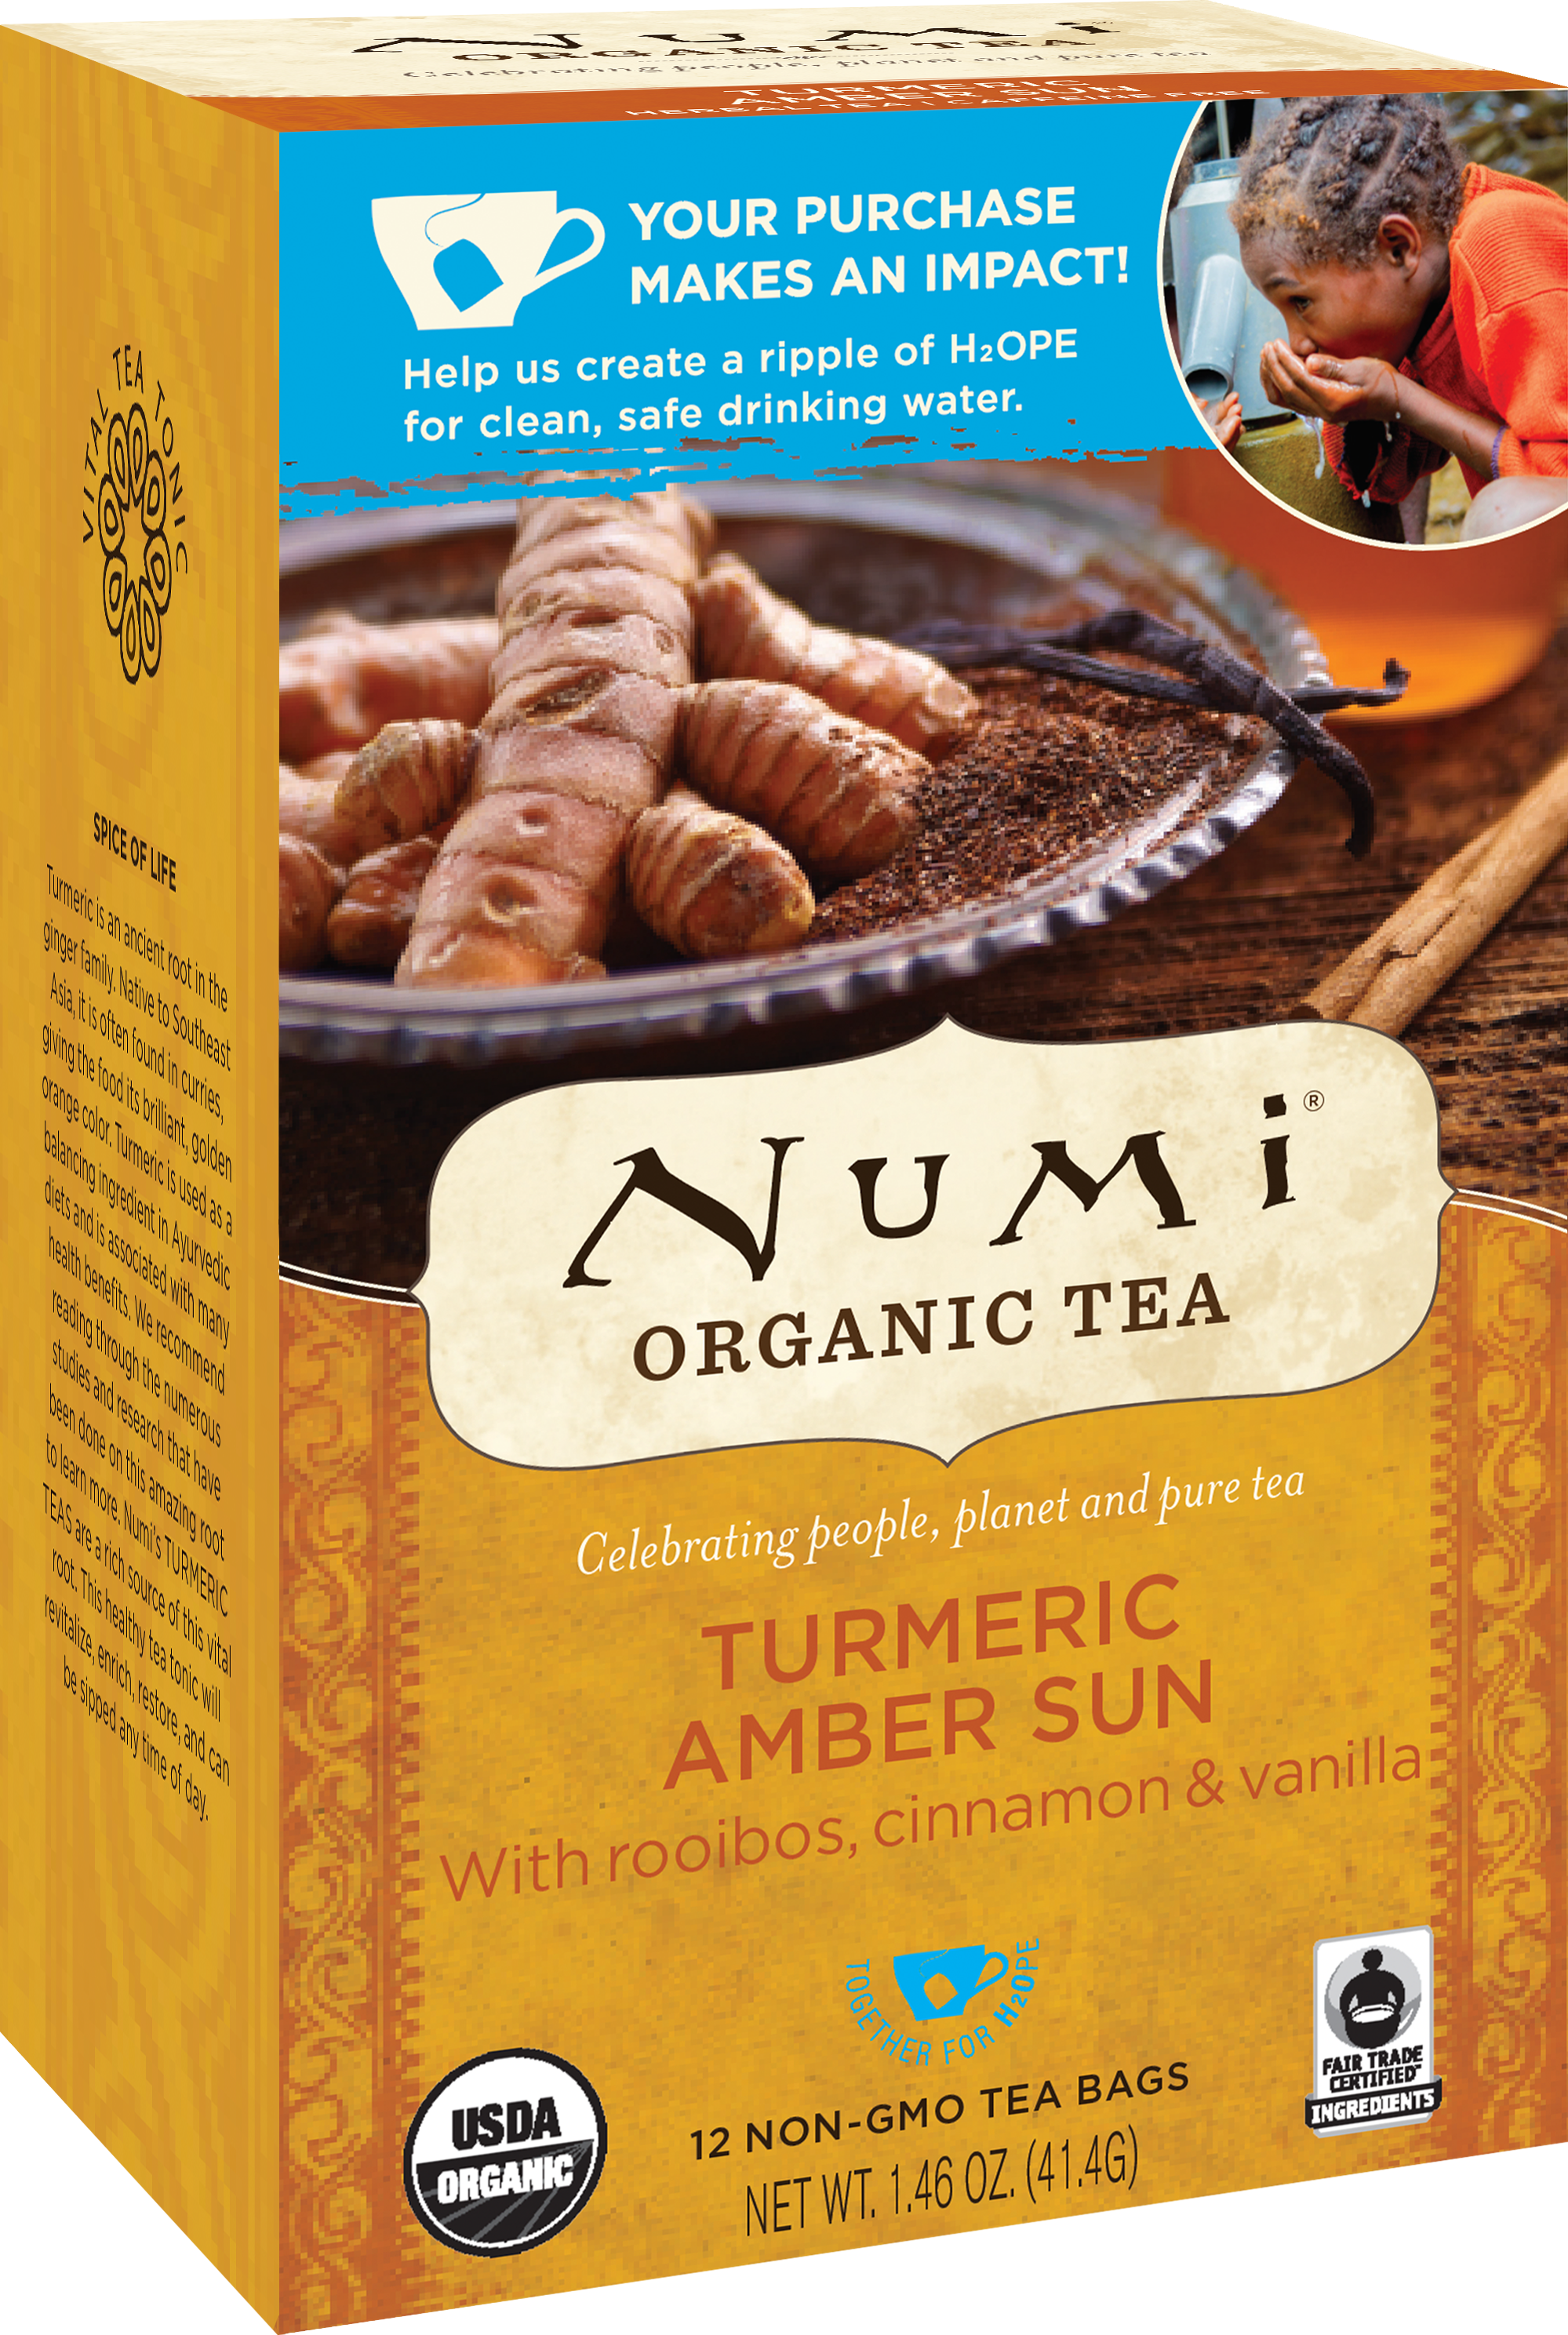 Numi's New Impact Packaging